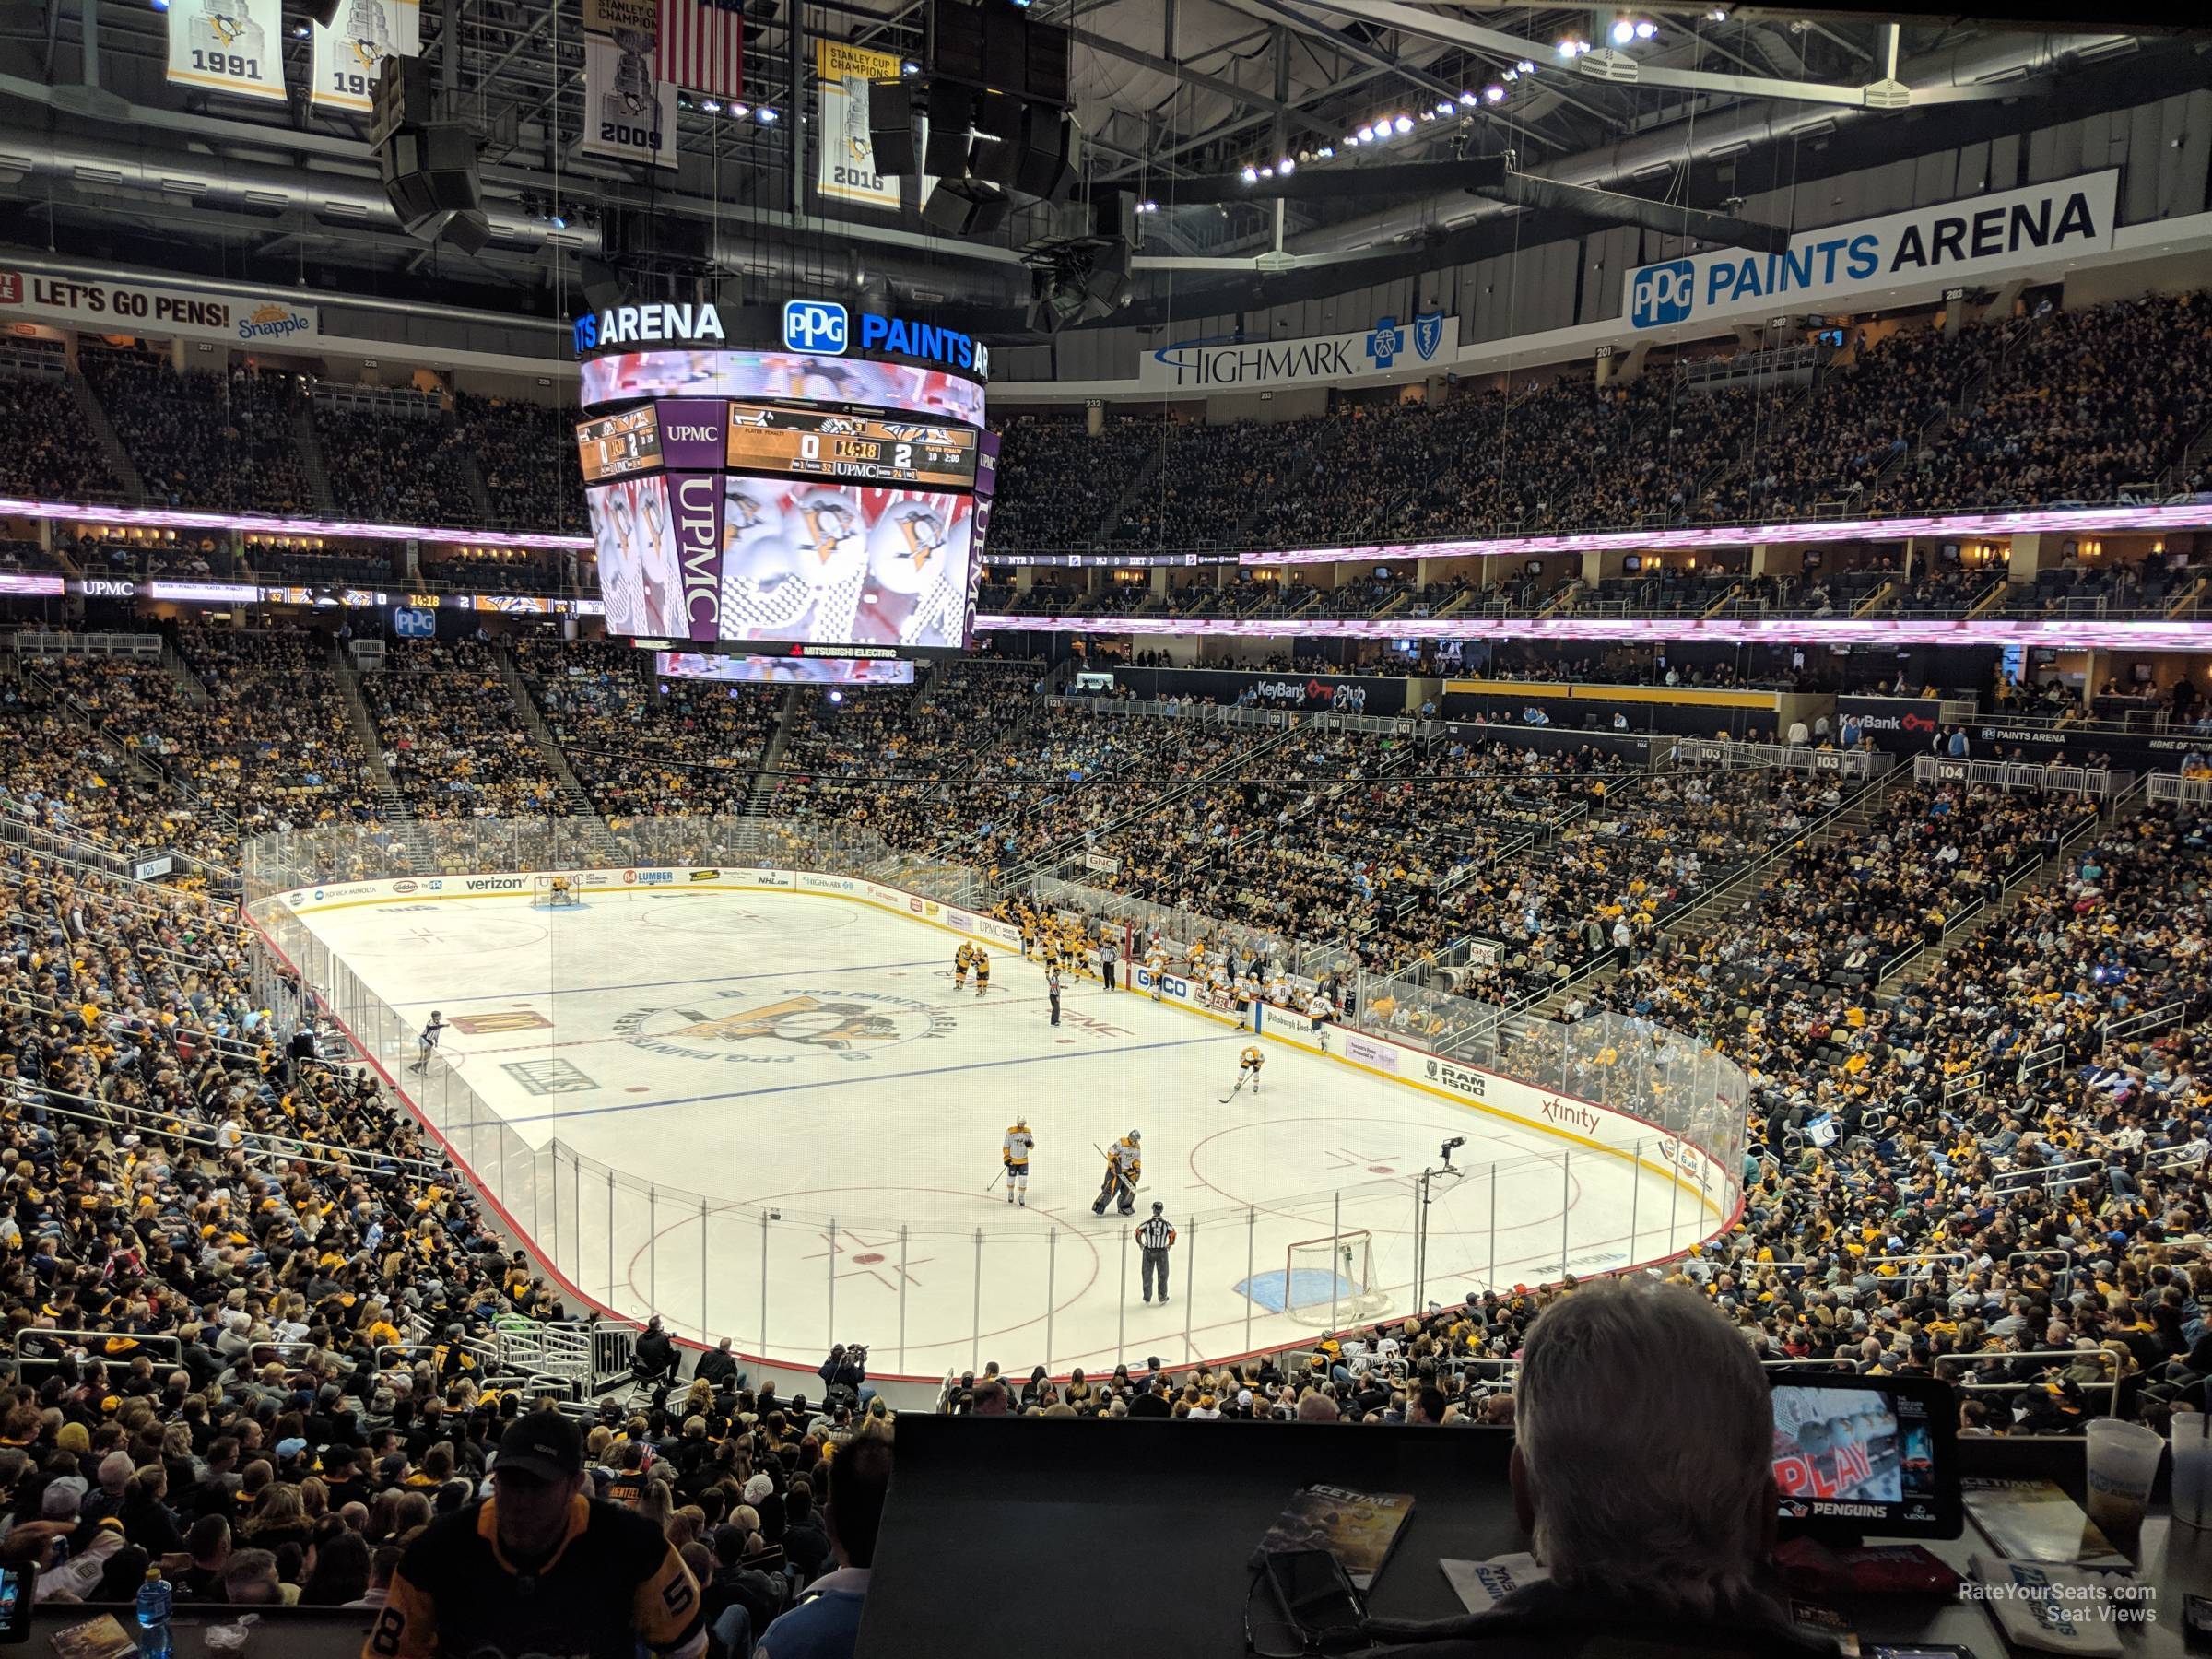 loge box 14 seat view  for hockey - ppg paints arena